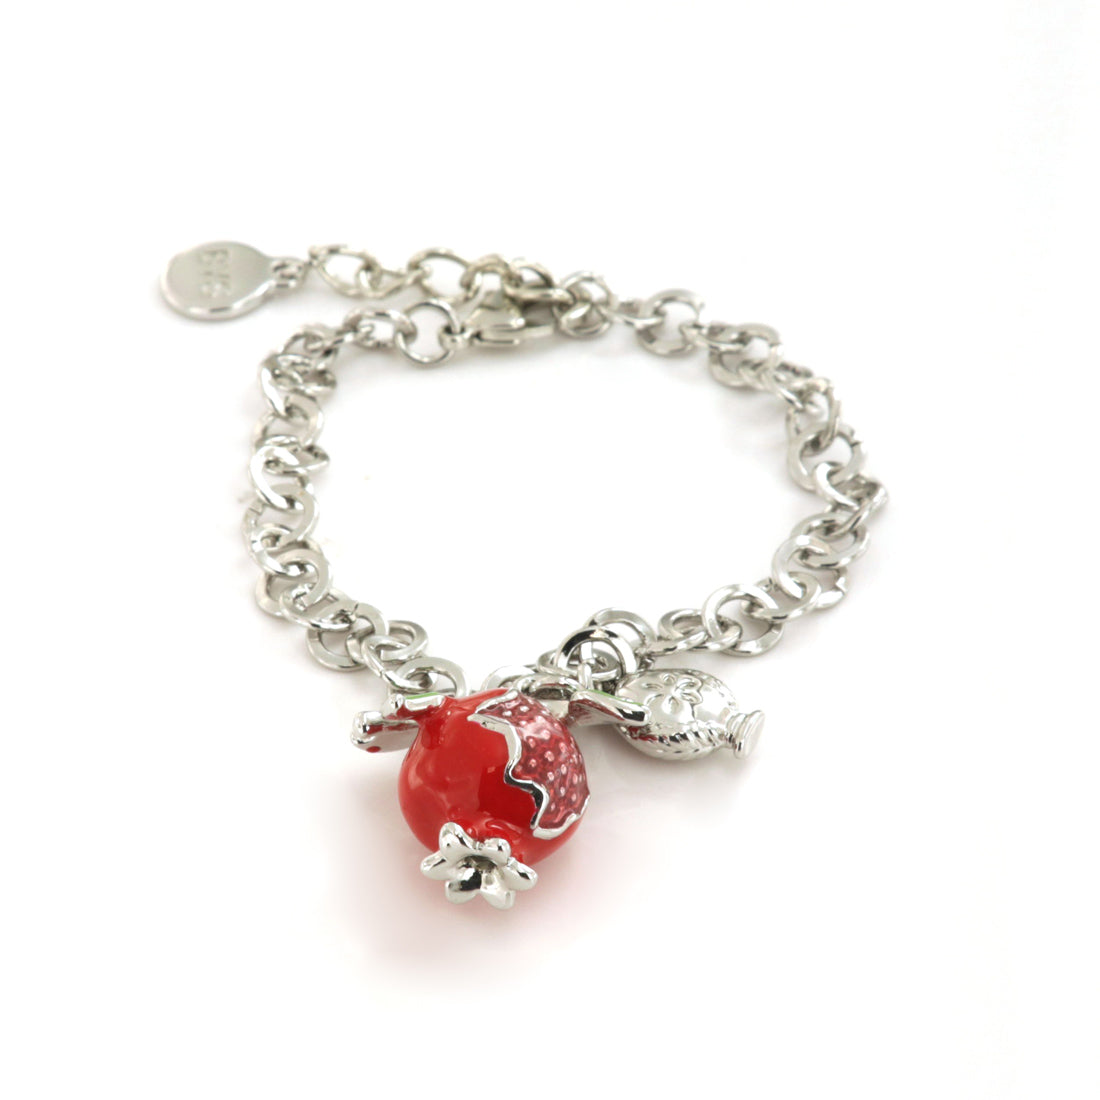 Metal bracelet with pendant pomegranate embellished with colored enamels and small pump on the side